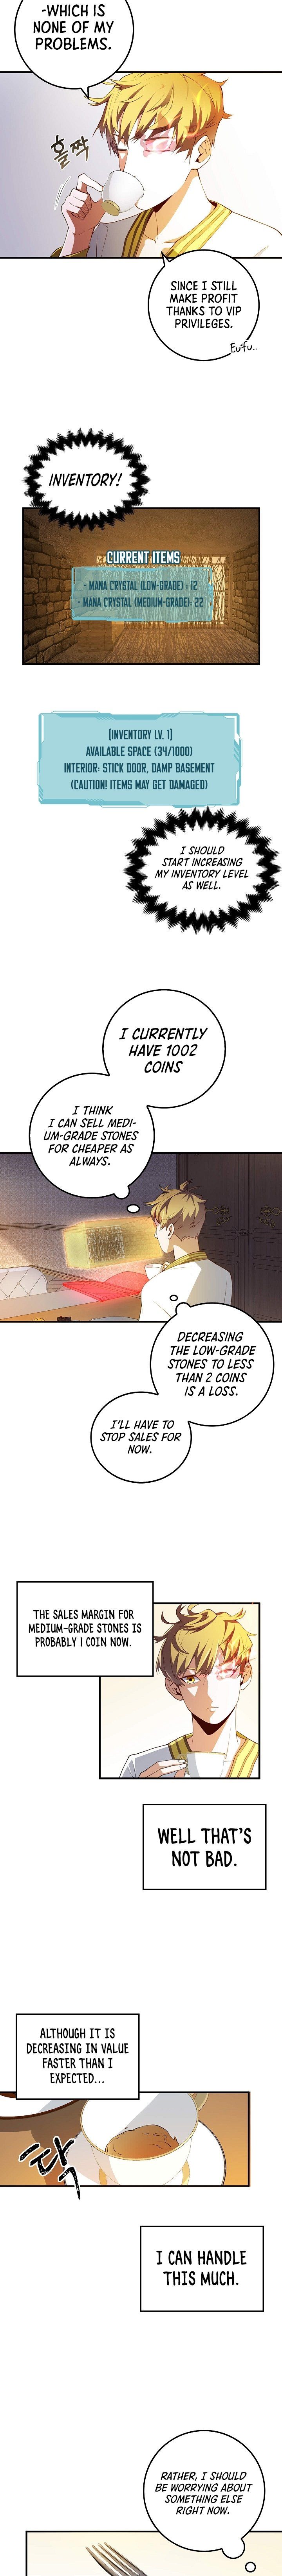 The Lord’s Coins Aren’t Decreasing?! Chapter 10 page 4